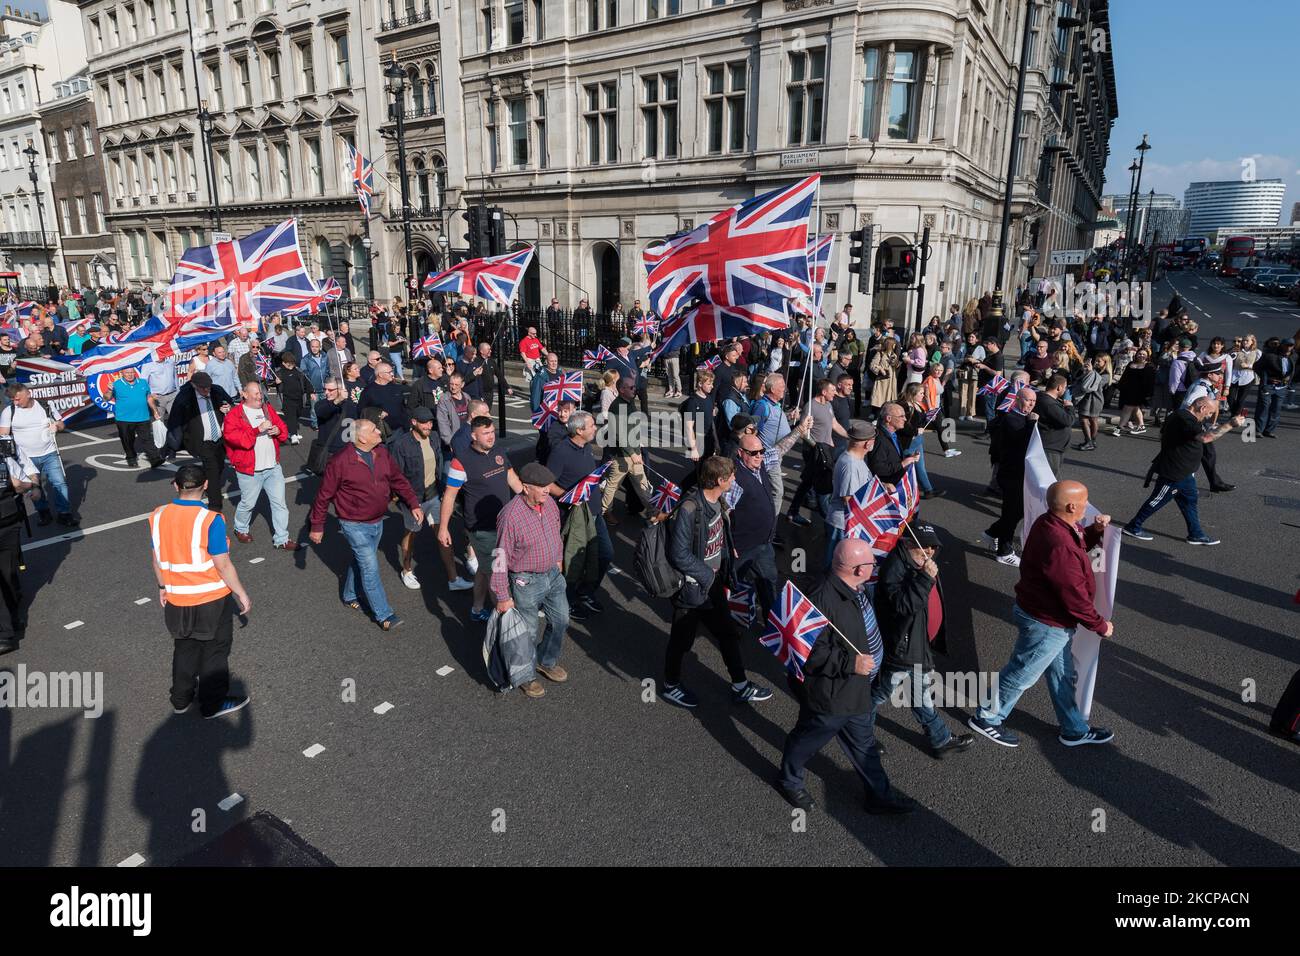 LONDON, UNITED KINGDOM - OCTOBER 09, 2021: Northern Ireland unionists and loyalists march along Whitehall in a protest against the Northern Ireland Protocol, which they argue undermines Northern Ireland's position as part of the United Kingdom by creating a trade border on the Irish Sea on October 09, 2021 in London, England. Next week, the EU is set to bring forward new proposals for the Northern Ireland Protocol, which was implemented after Brexit to protect the Good Friday agreement by keeping Northern Ireland aligned with the EU's single market for goods to prevent creating a hard border o Stock Photo